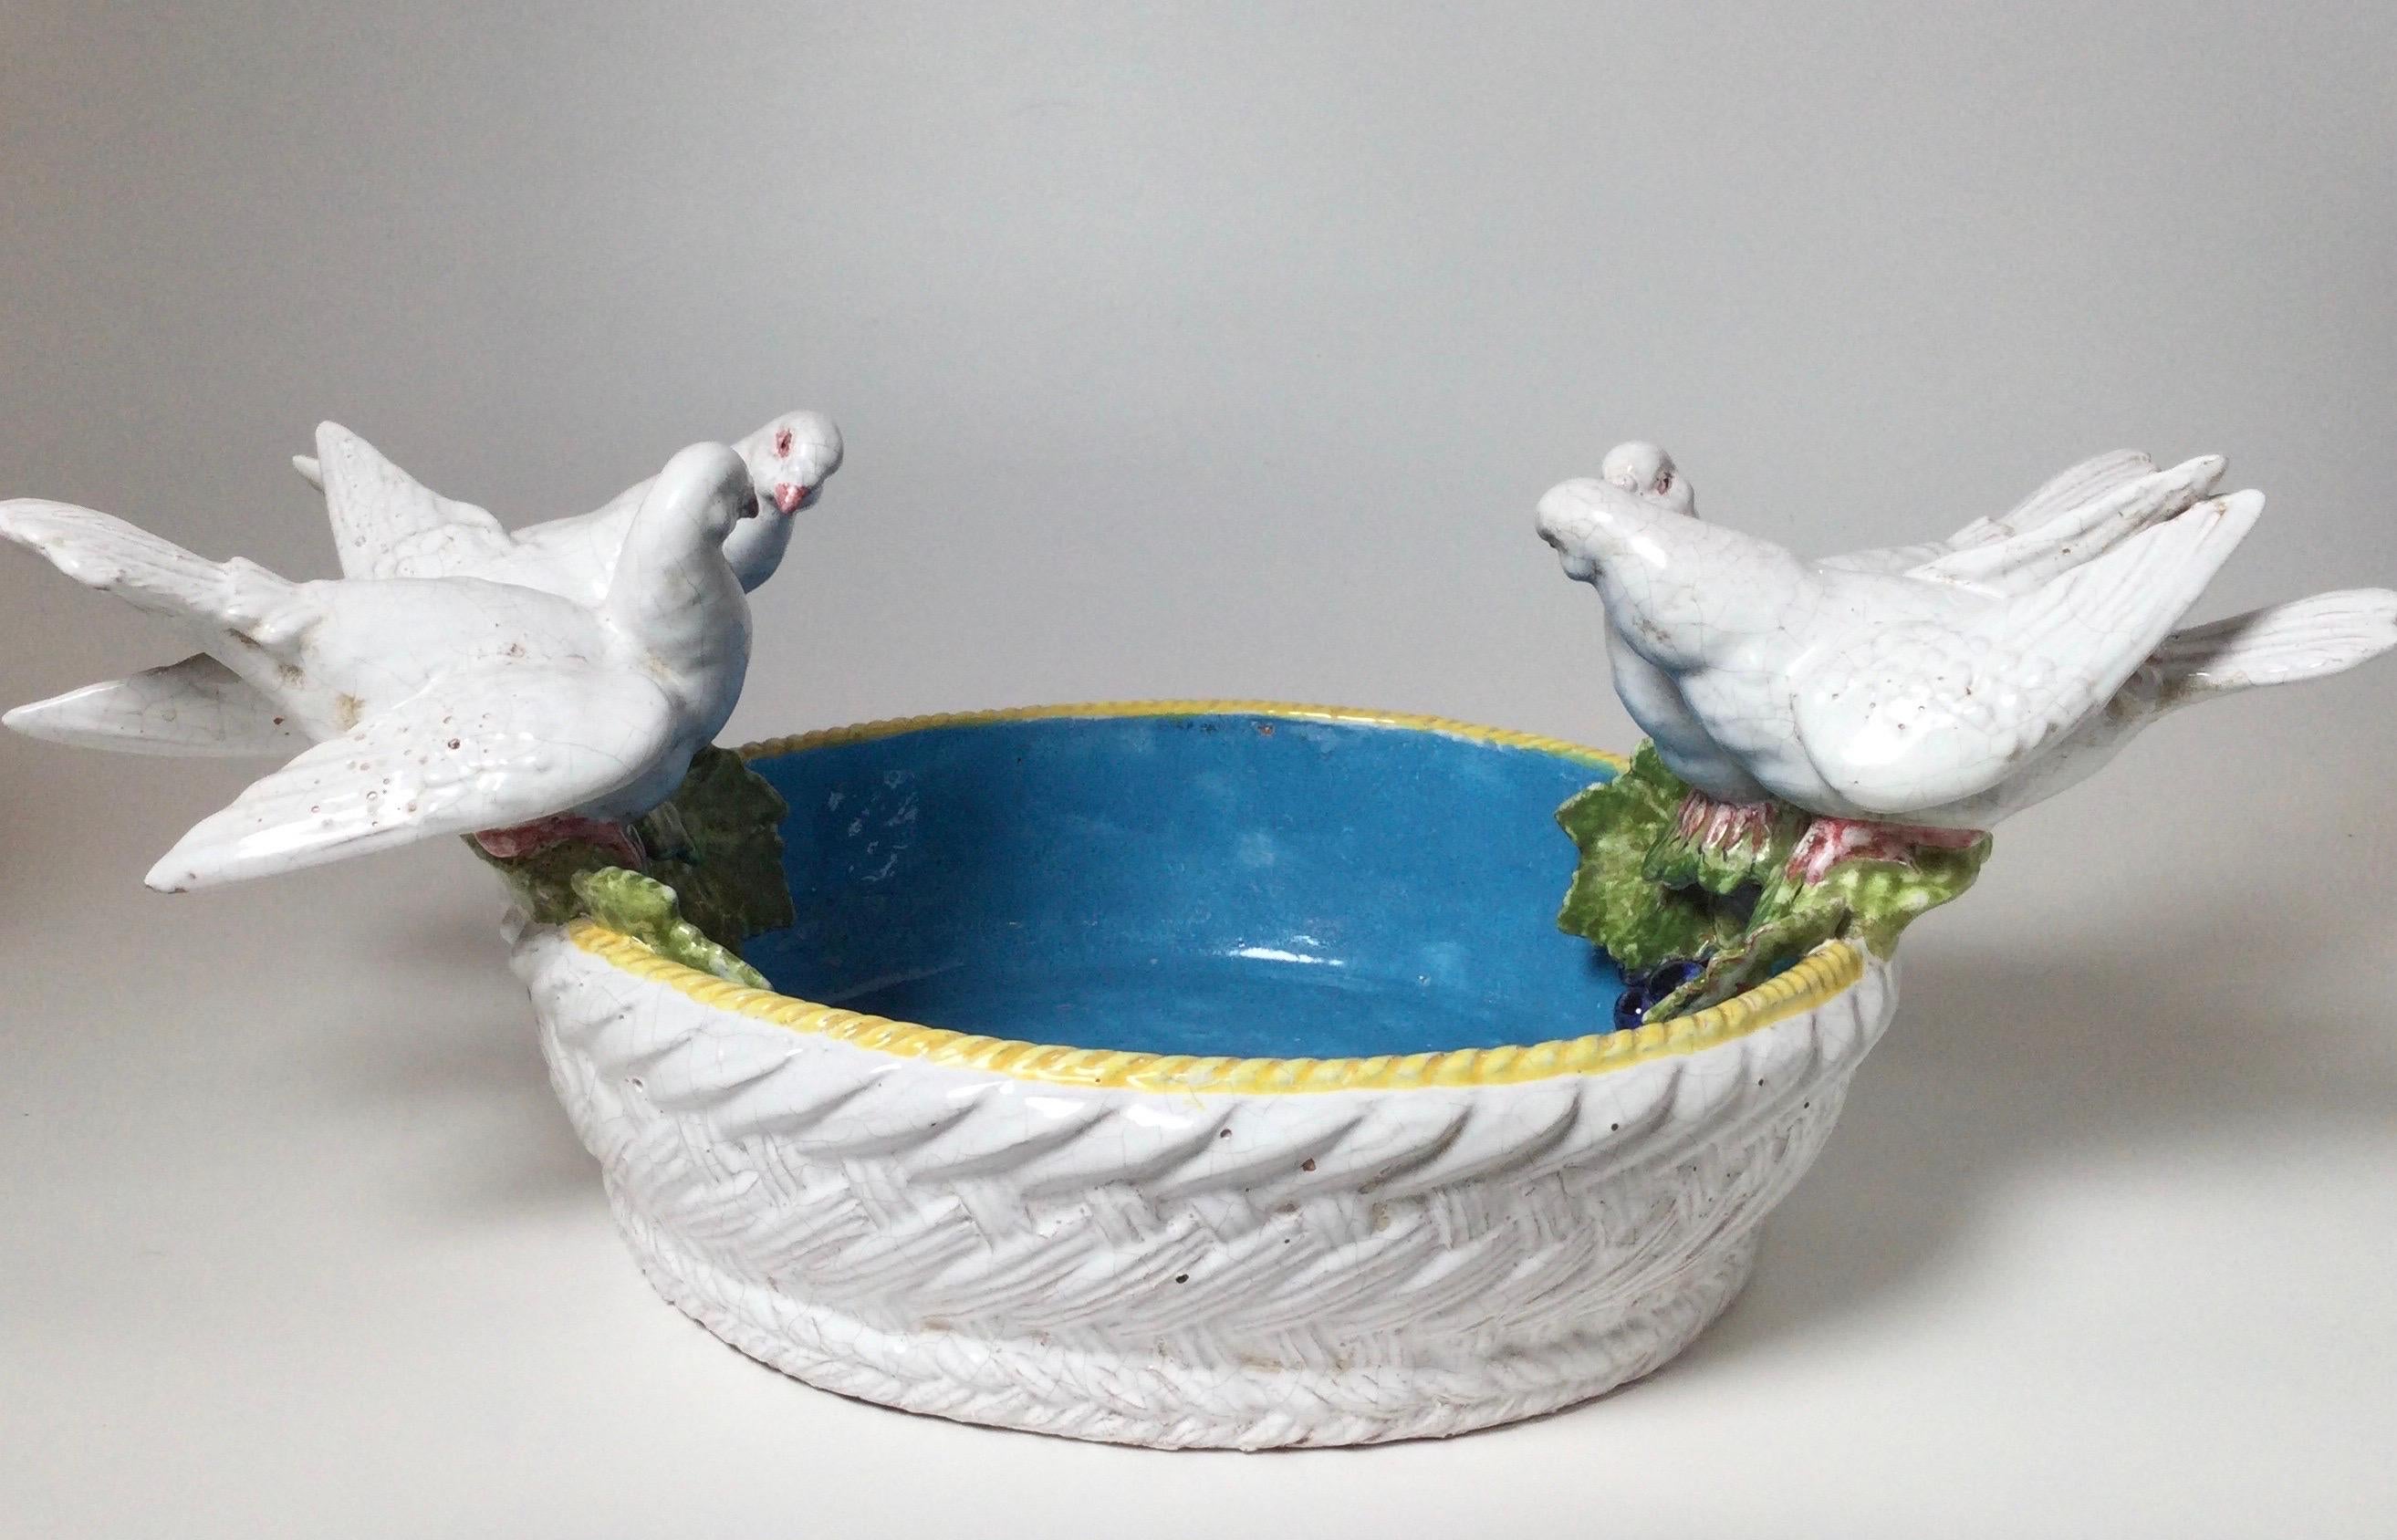 A whimsical large open bowl in the form of a bird bath. The white doves perched on the rim of a bowl with an azure blue interior. The bowl in a basket form with grapes and leaves. Vibrant color on white faience.